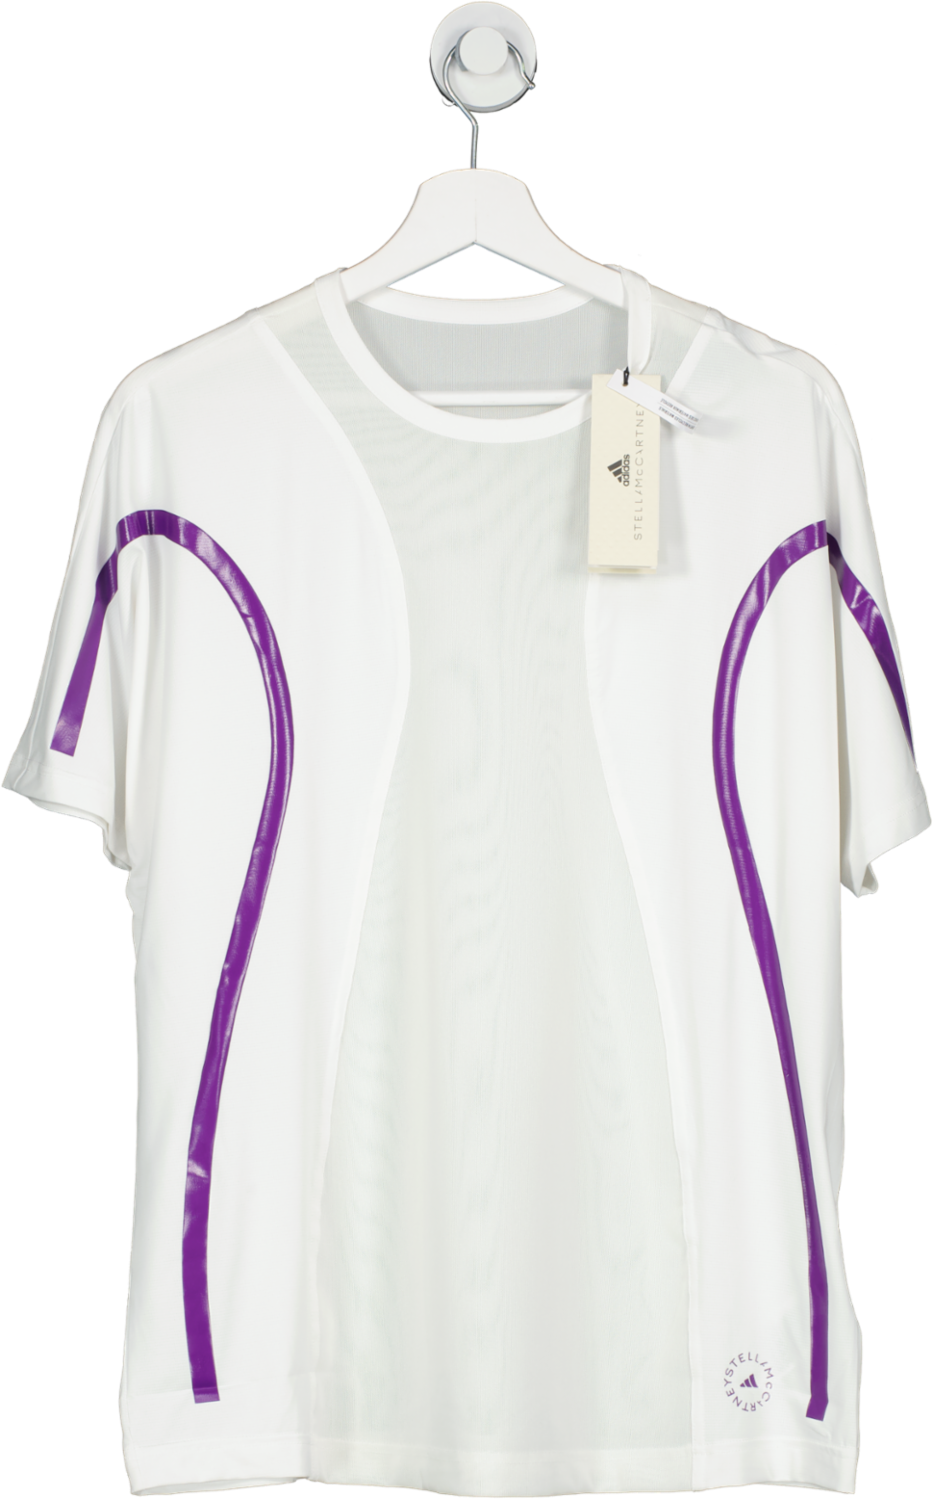 Adidas by Stella Mccartney Conscious  Loose Running Logo Tee In White & Active Purple UK S